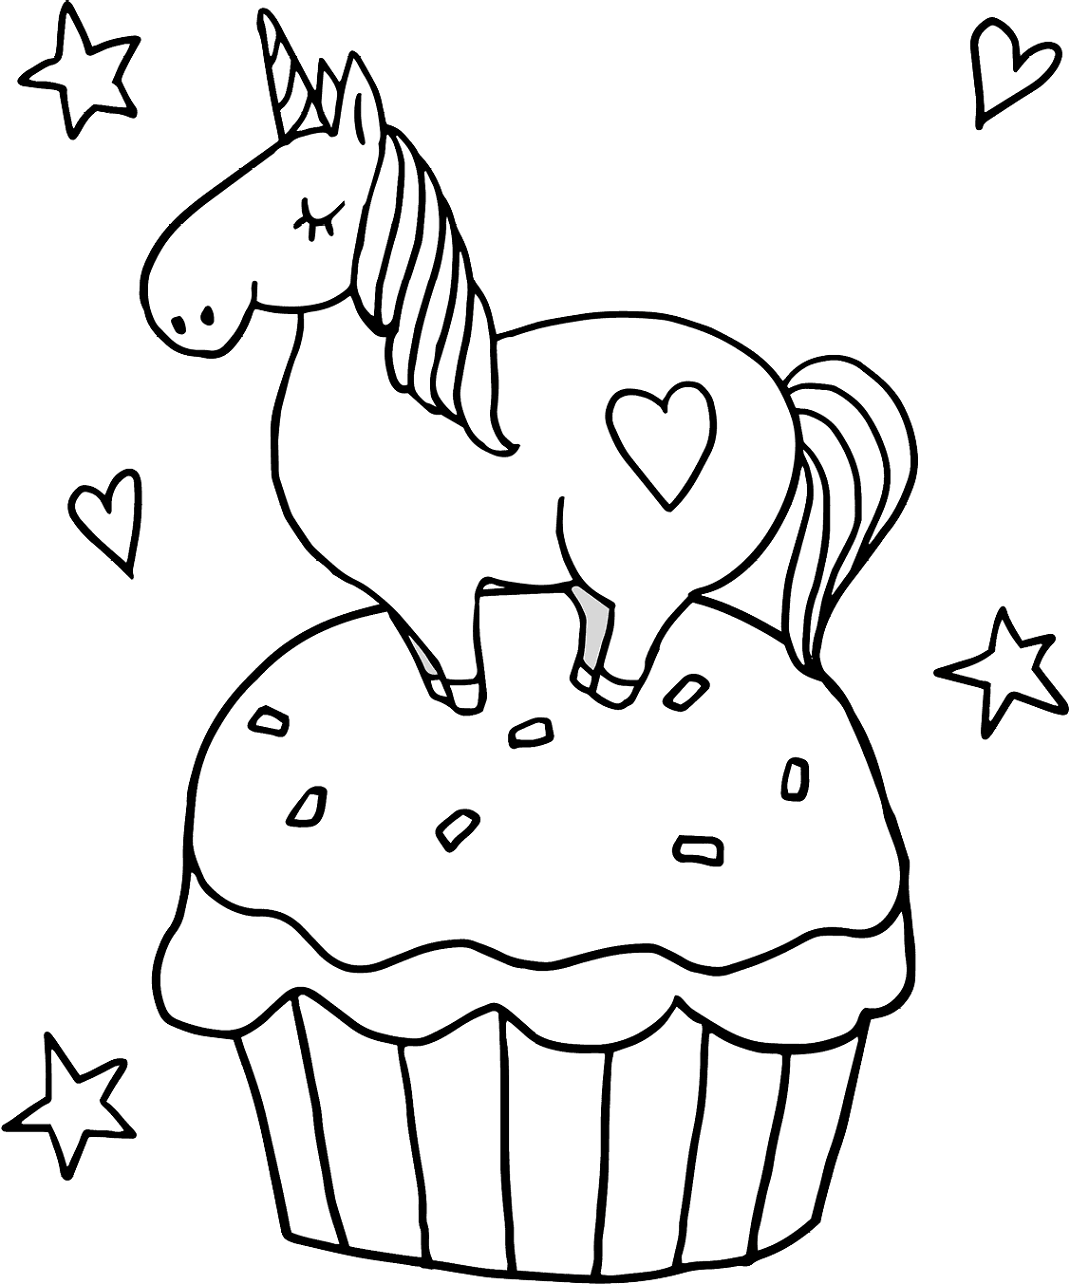 Little Unicorn On Cupcake Coloring Page - Free Printable Coloring Pages